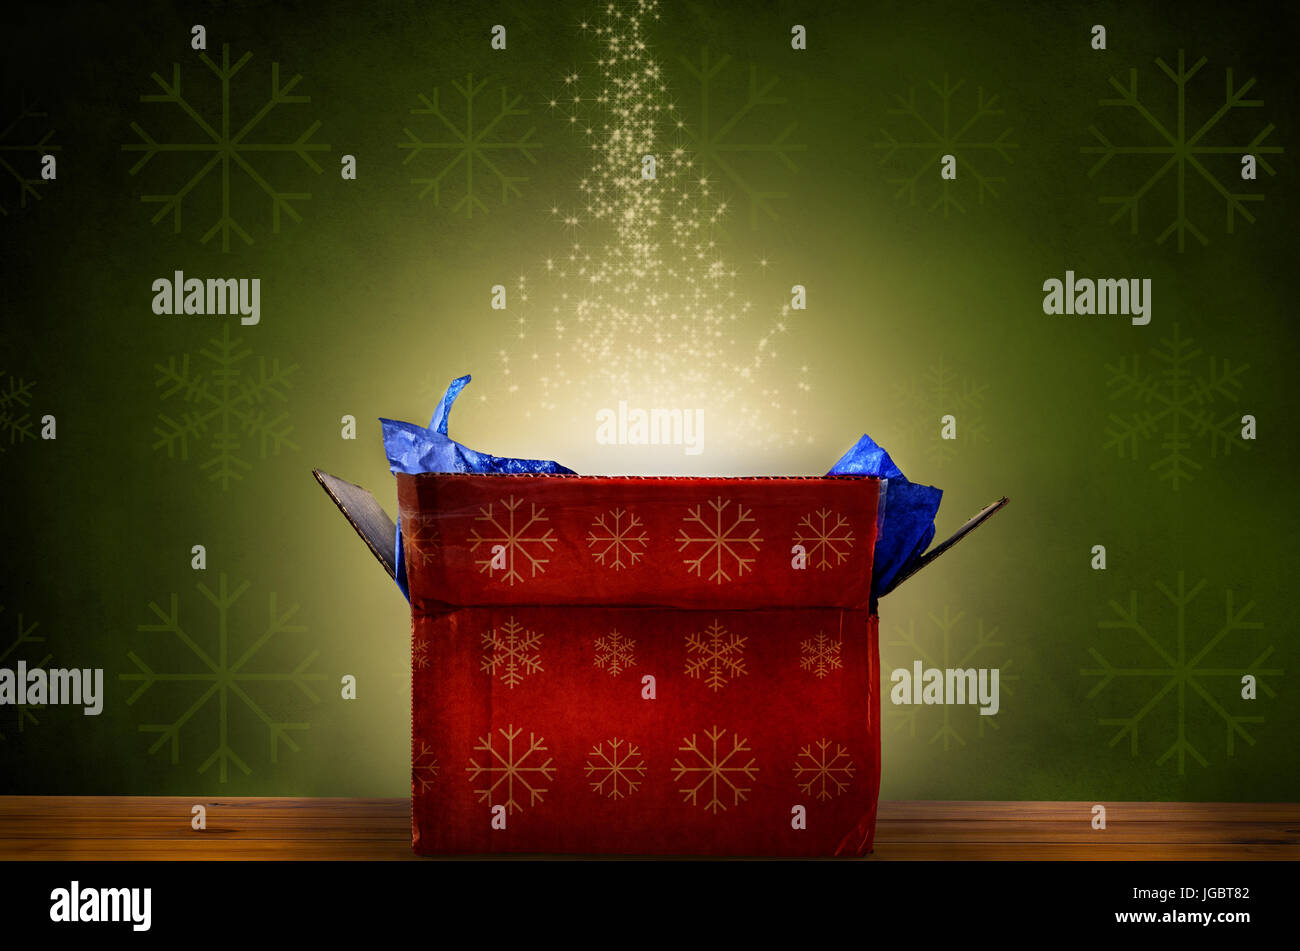 An opened red Christmas gift box with gold snowflake patterns, emitting a magical warm bright glowing light and rising sparkling stars.  Set against a Stock Photo